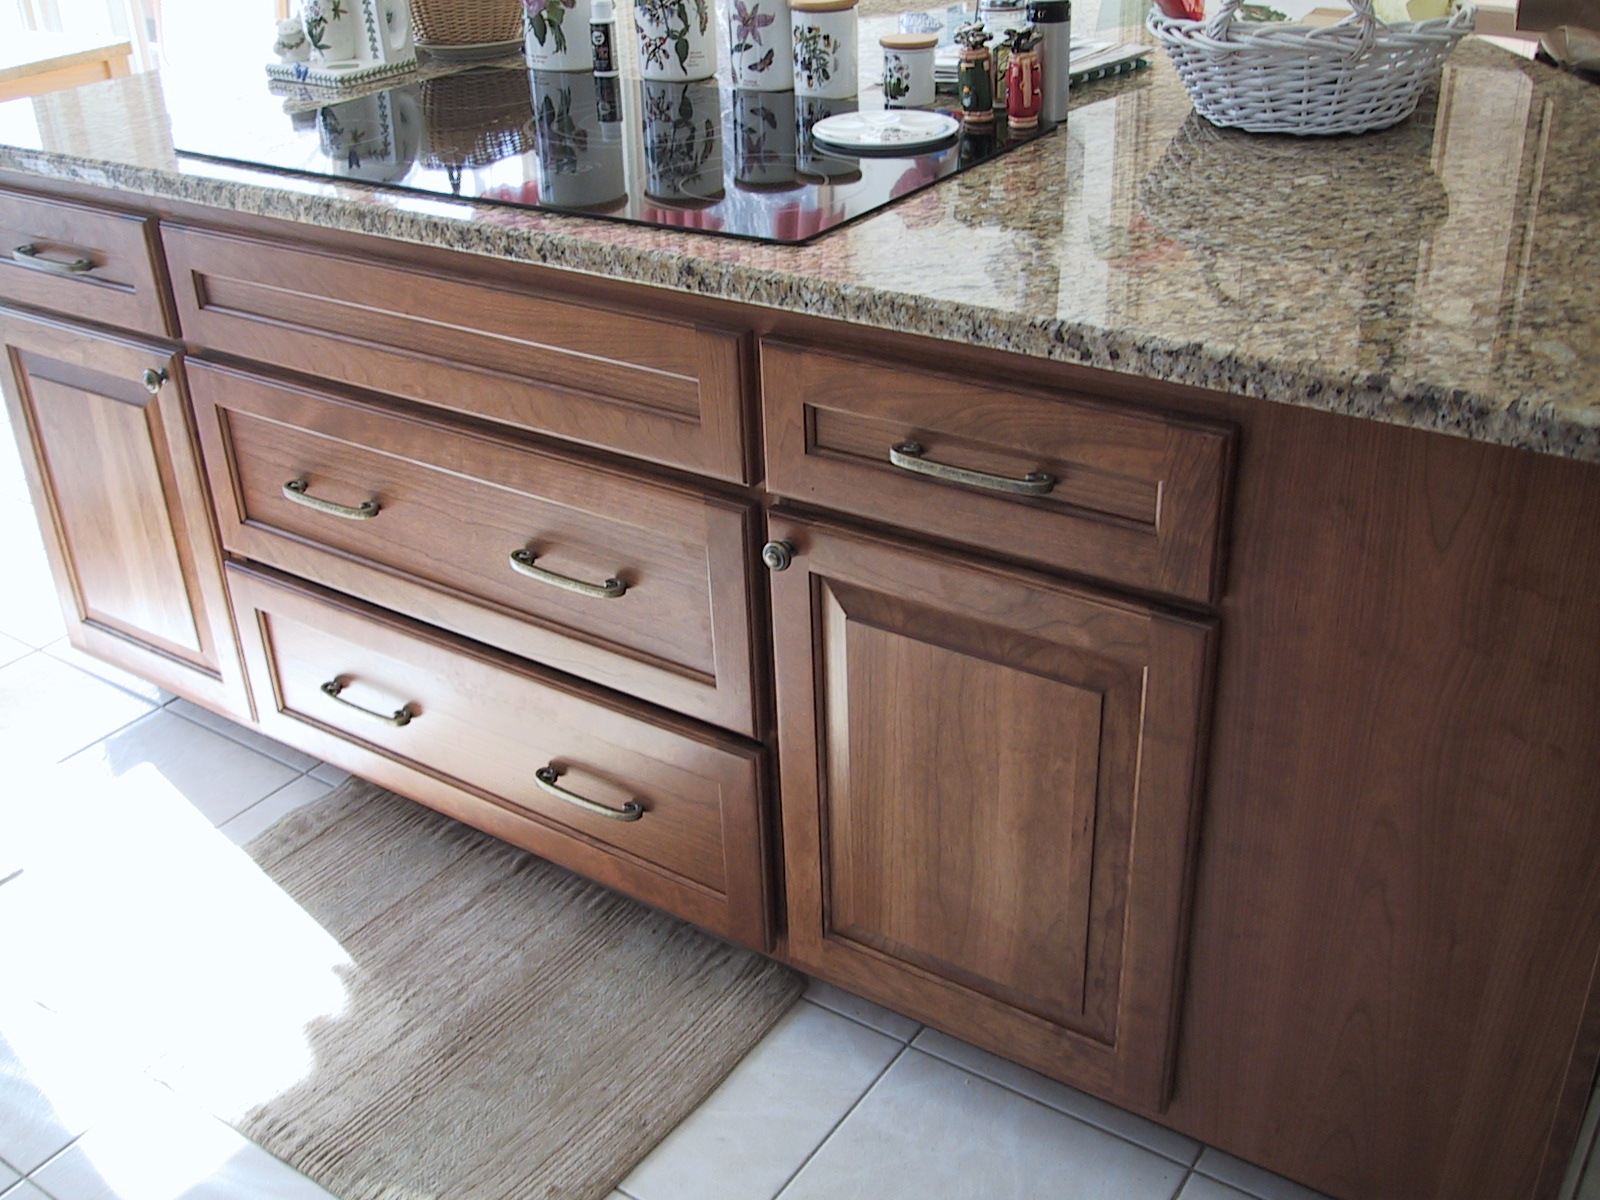 Replace Cabinets Keep Countertops, Replace Countertop Without Replacing Cabinets